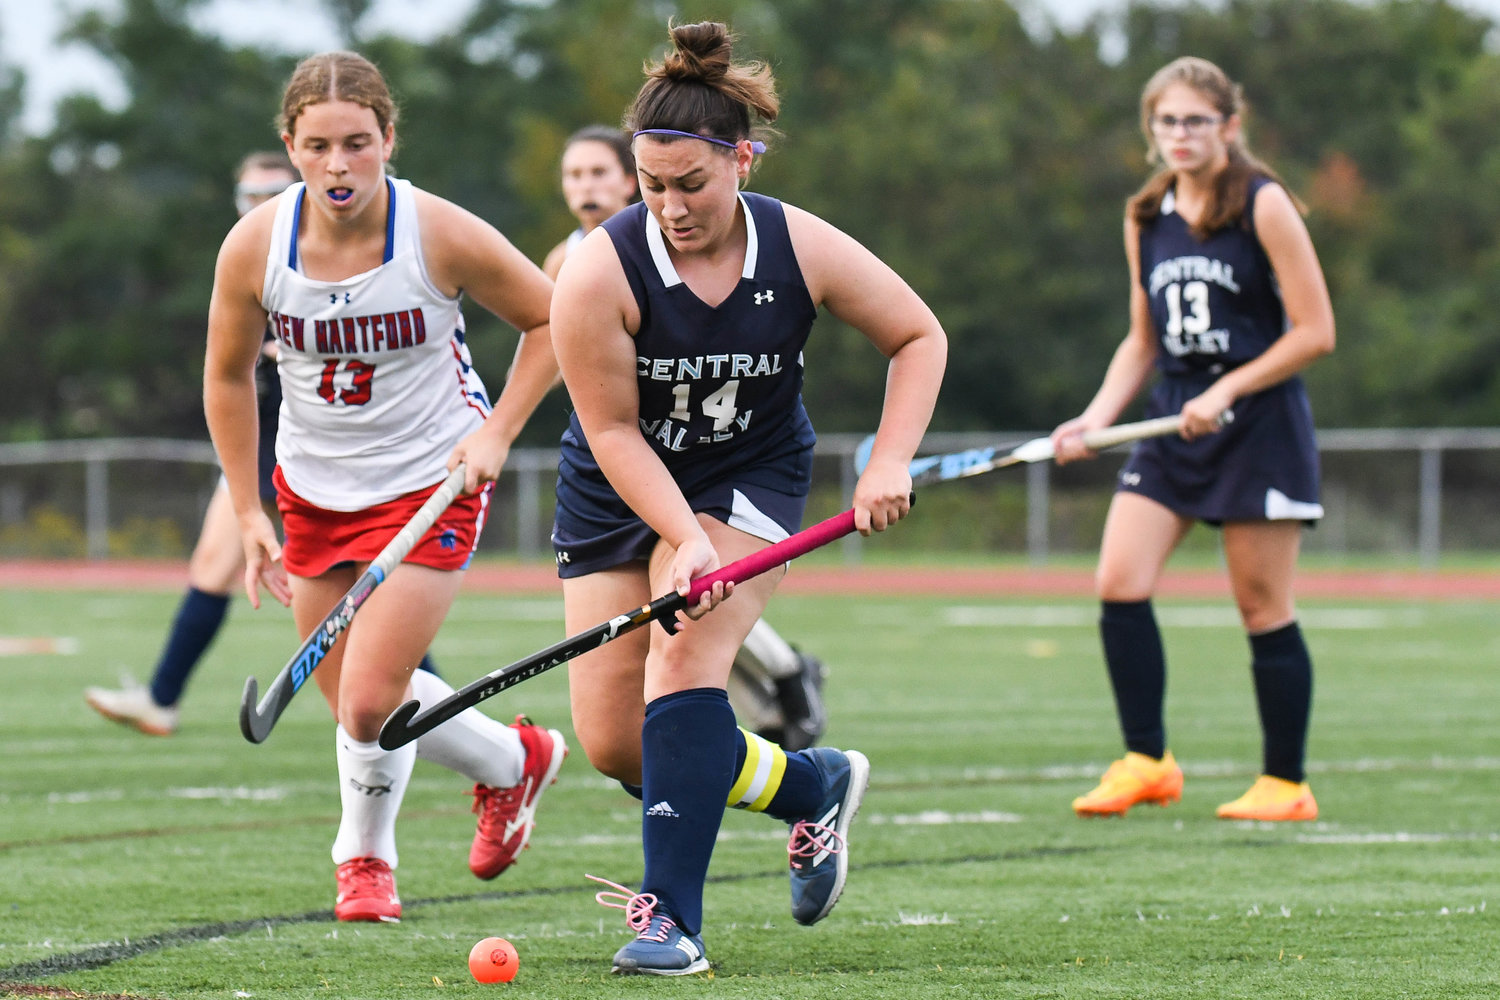 Central Valley Academy player Samantha Helmer (14) moves the ball against New Hartford player Sienna Holmes during the field hockey game on Wednesday.